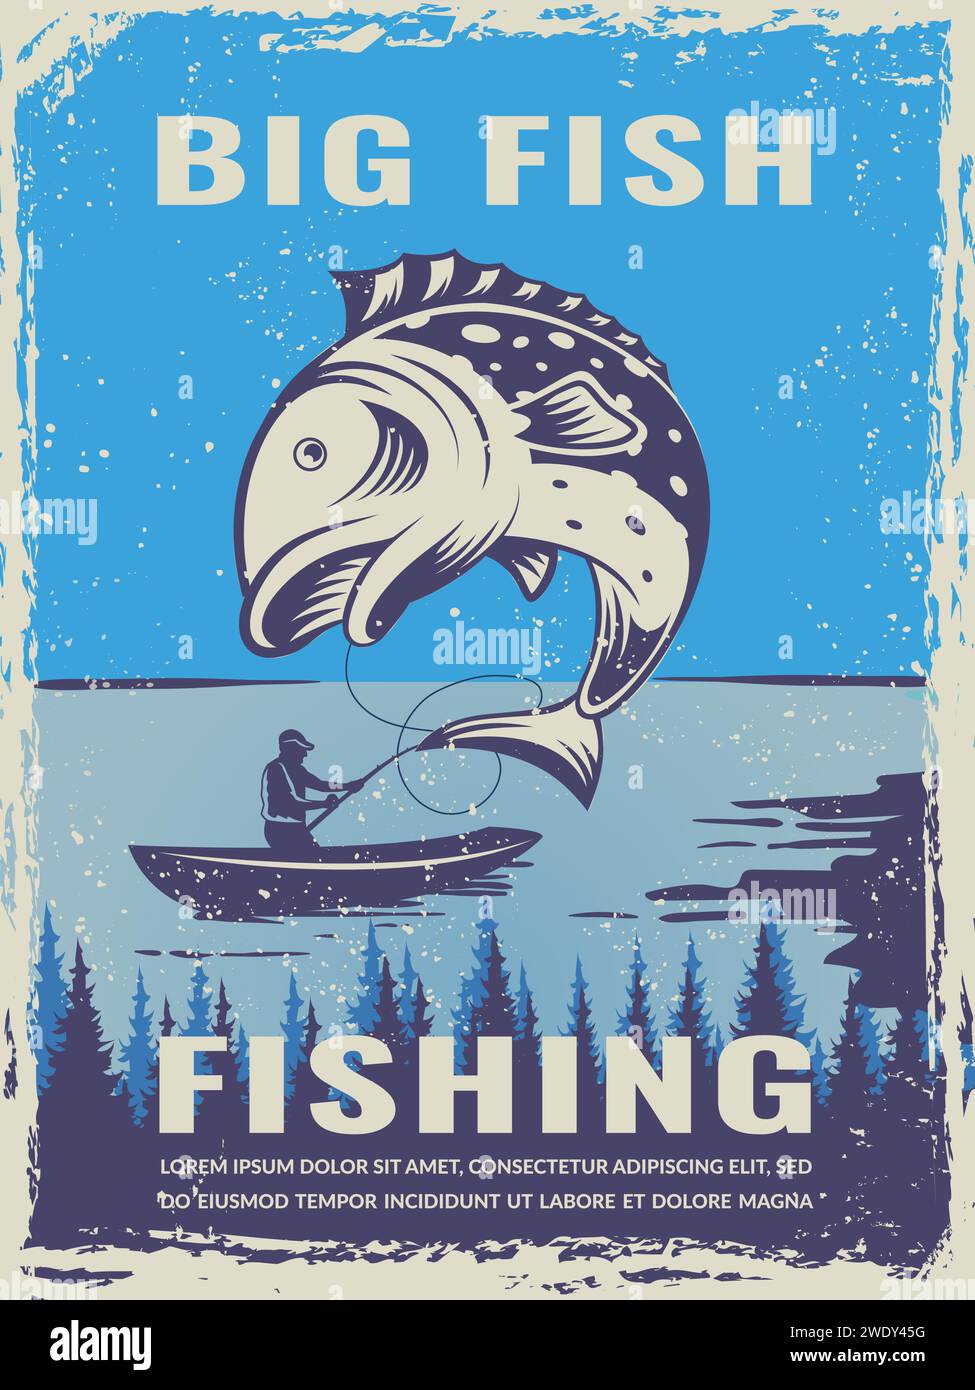 Vintage Fly Fishing Poster Field and Stream Print Retro Fisherman